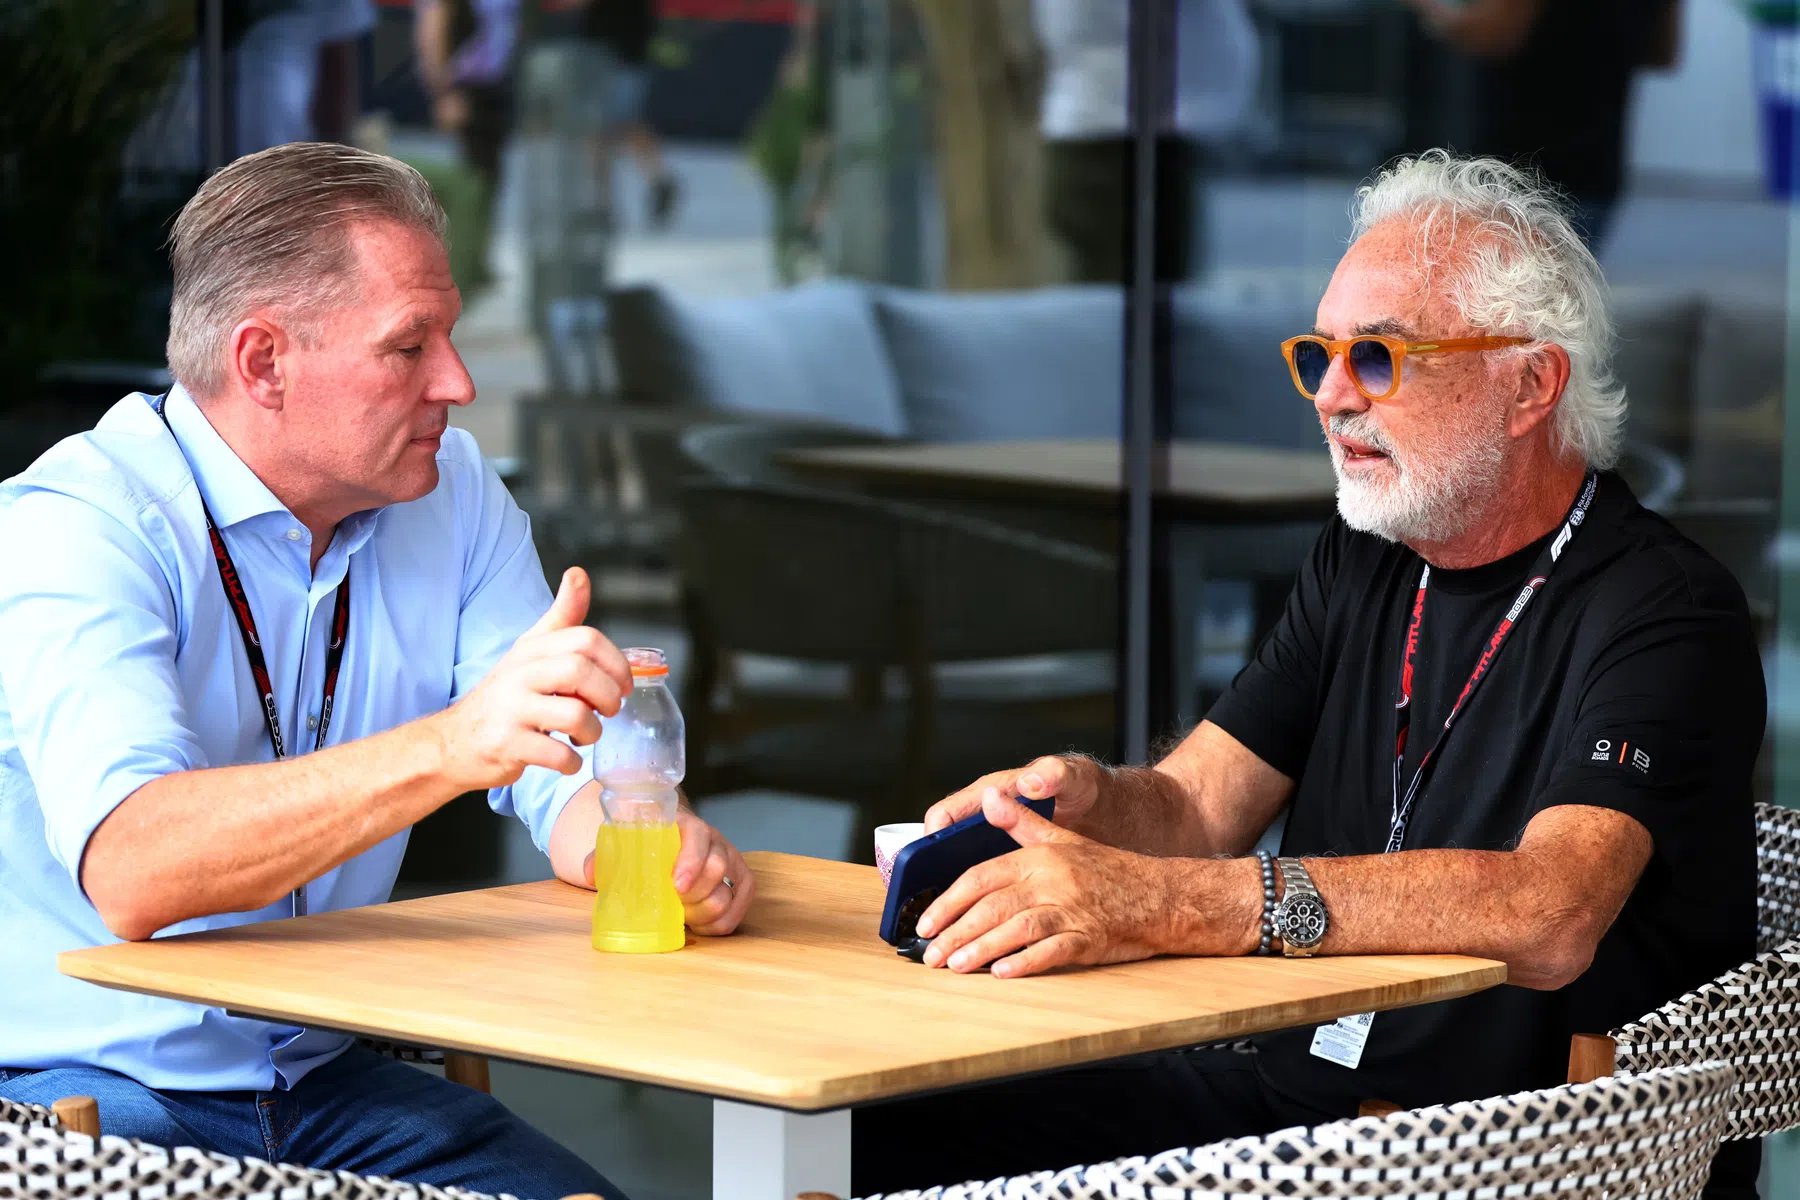 briatore for alpine the right man now, but cotroversial